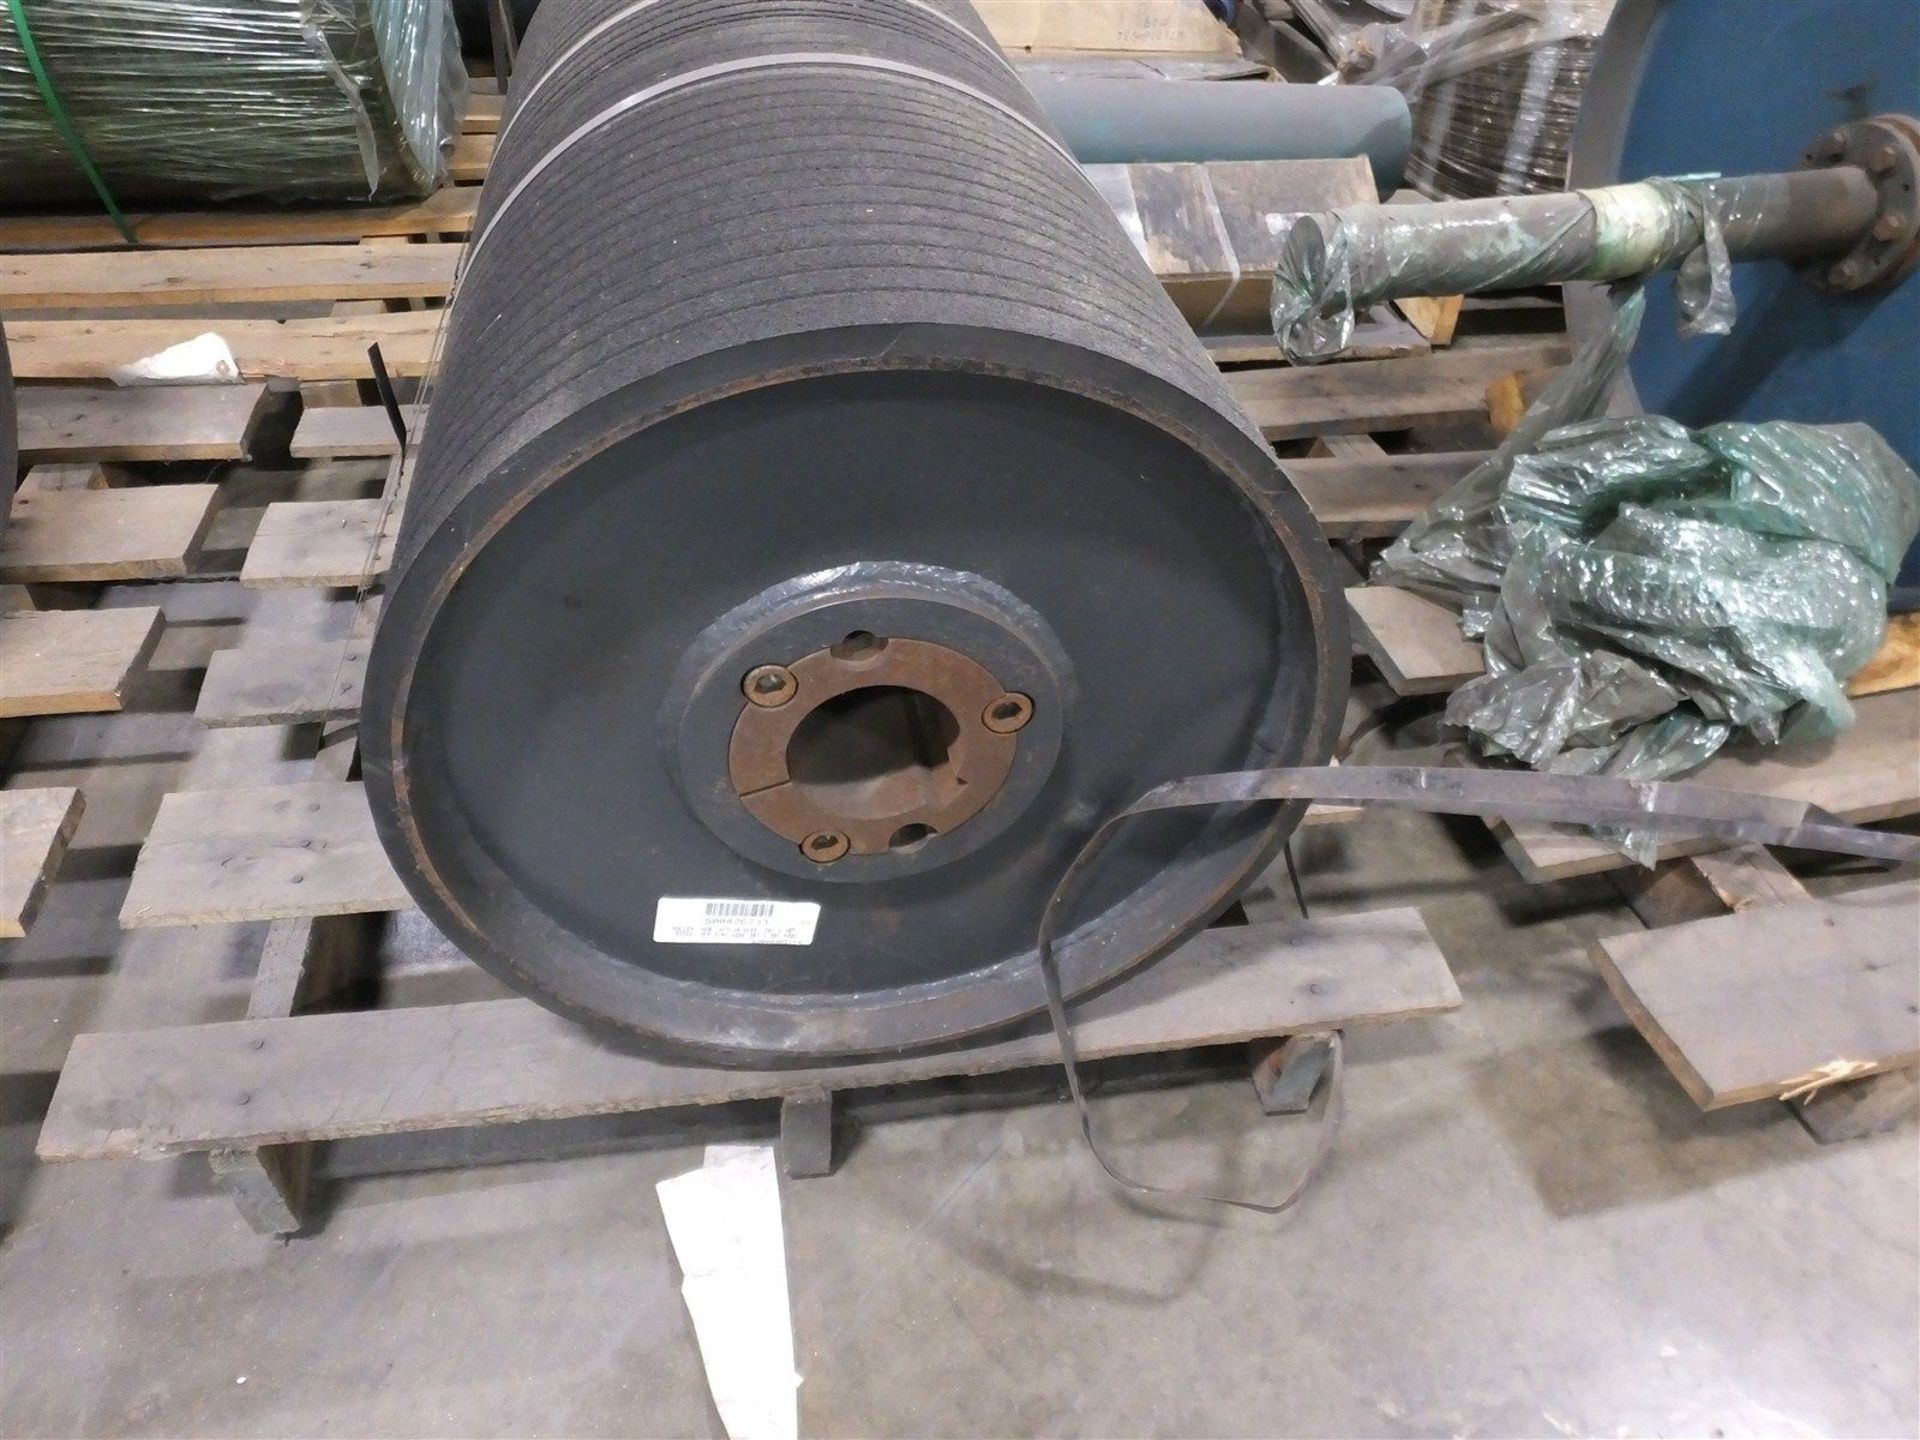 Dodge Pulley WSSF 20 in X 38 in Hub W/TL40 (Rigging Fee - $95) - Image 4 of 5